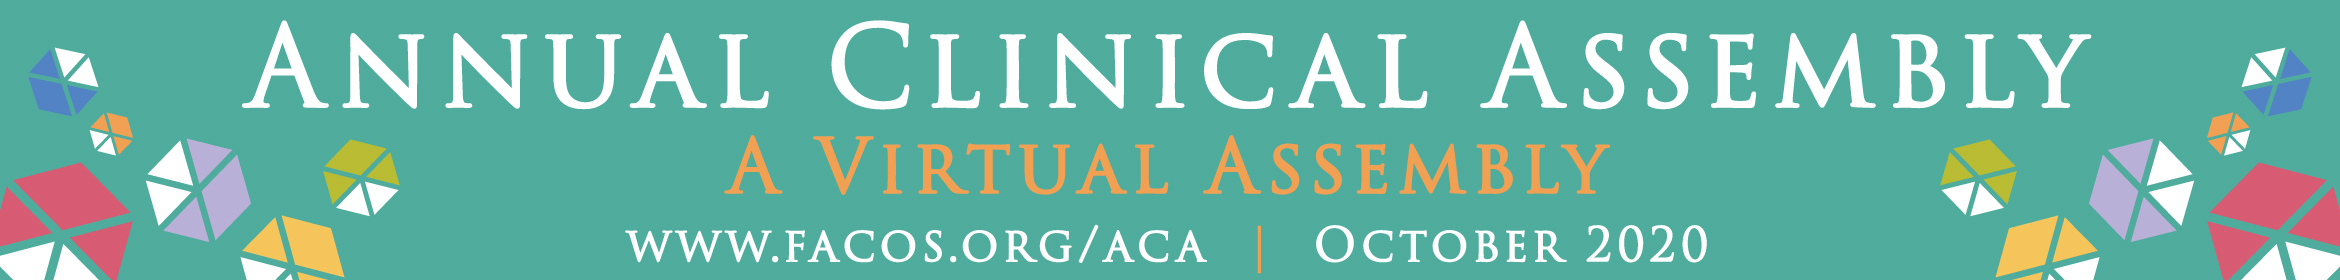 2020 Annual Clinical Assembly (ACA)  Main banner